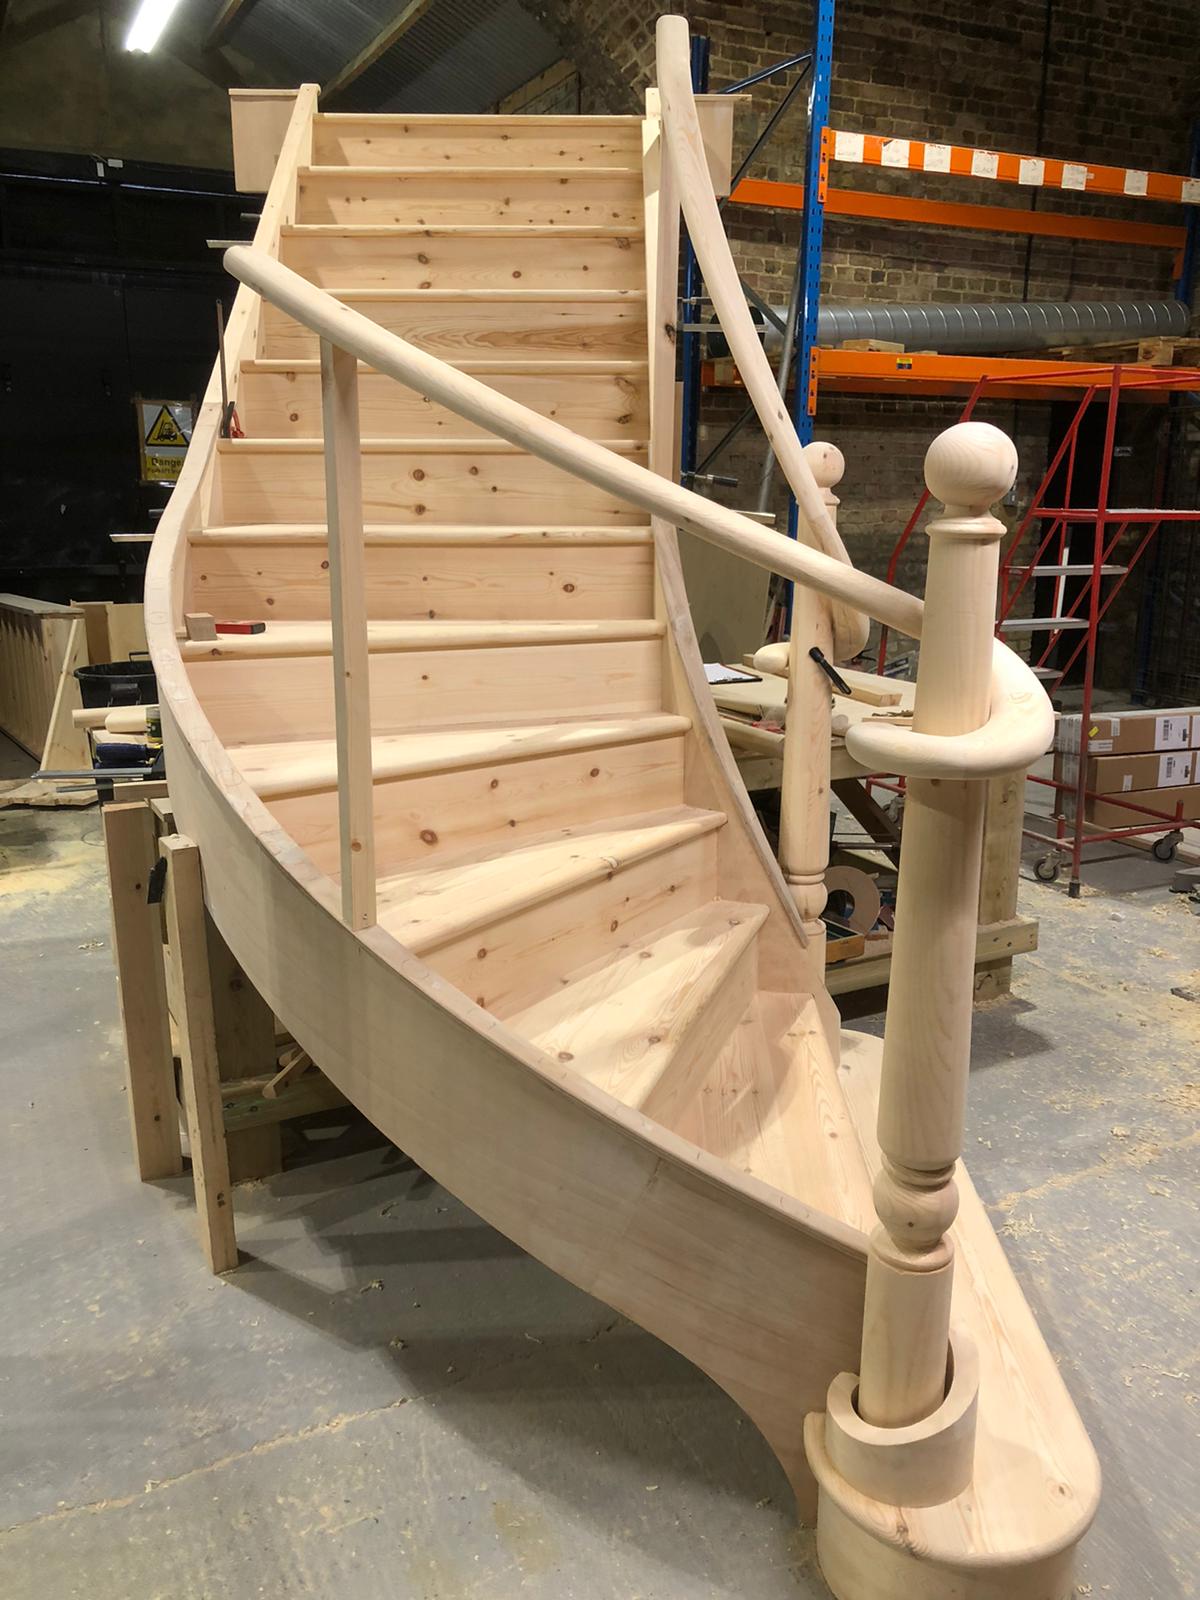 bespoke timber staircase manufacturers,staircase manufacturers,timber staircases,timber stairs,purpose made staircases